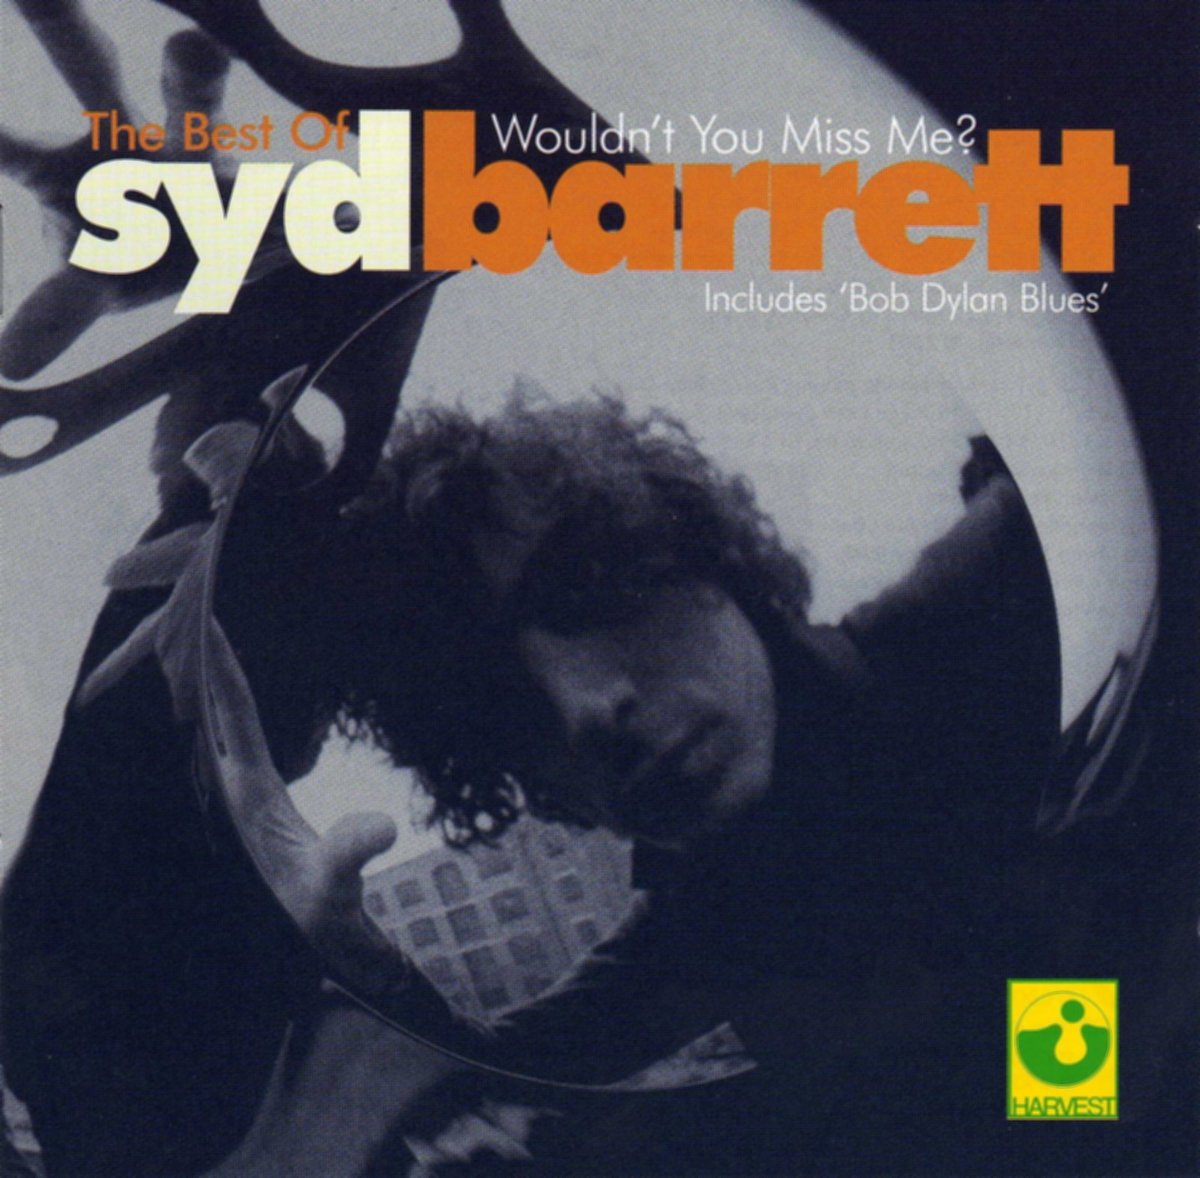 In 2001, Wouldn't You Miss Me: The Best Of Syd Barrett was released. It included Two Of A Kind from a BBC radio session, and from David Gilmour's own collection, Bob Dylan Blues.